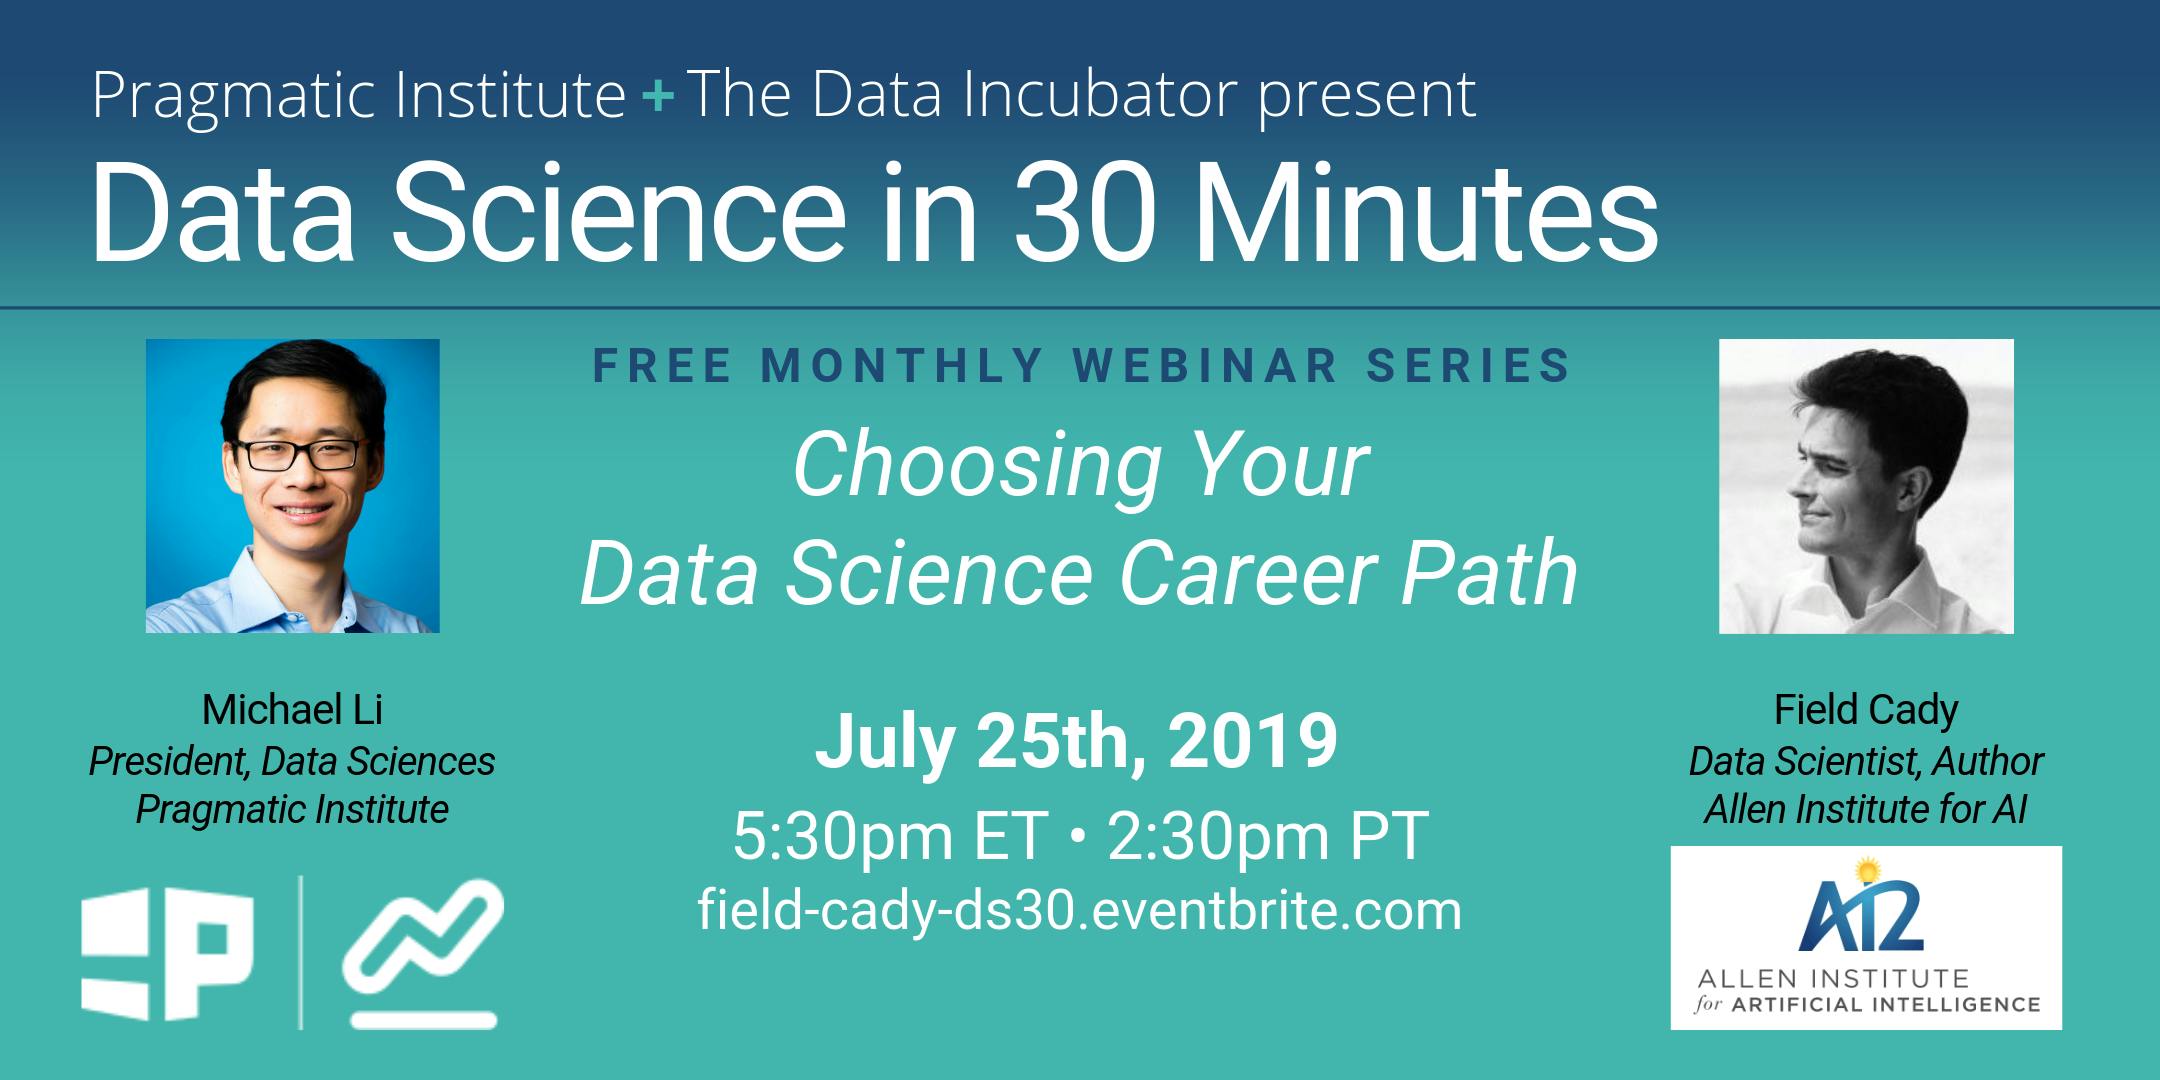 Data Science in 30 Minutes: Choosing Your Data Science Career Path with Field Cady